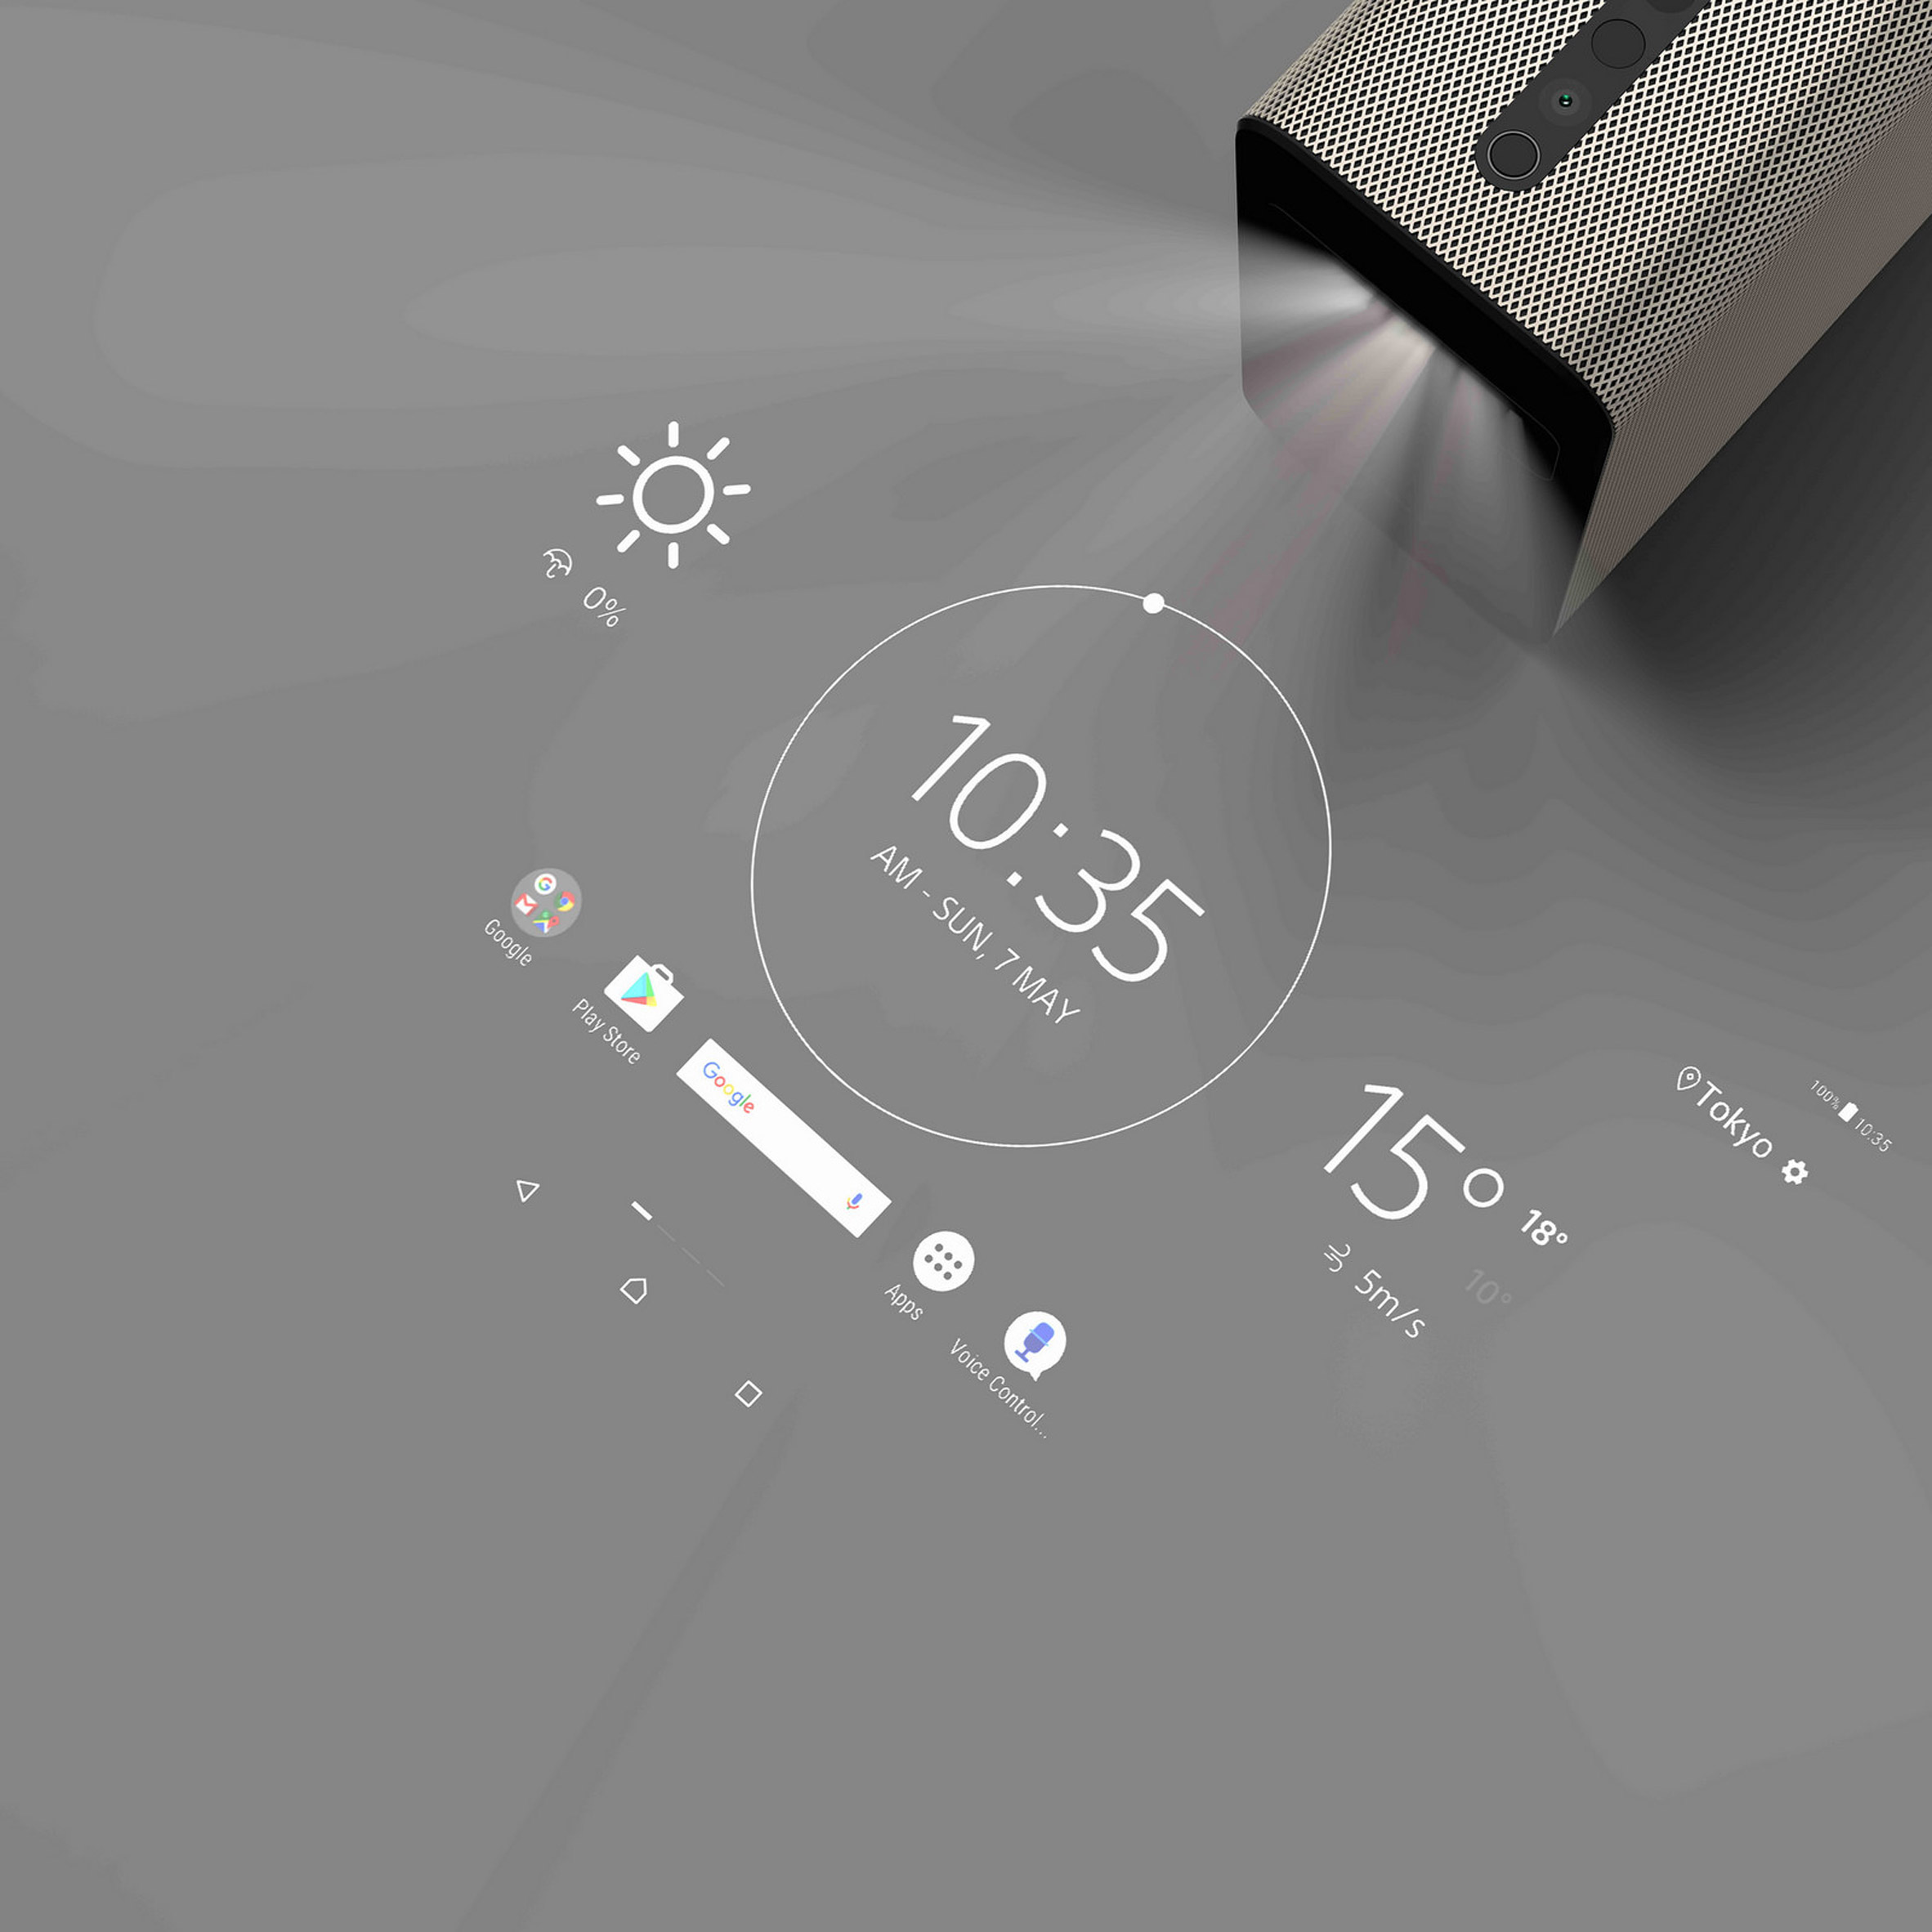 Sony launches Xperia Touch projector that turns any surface into a 